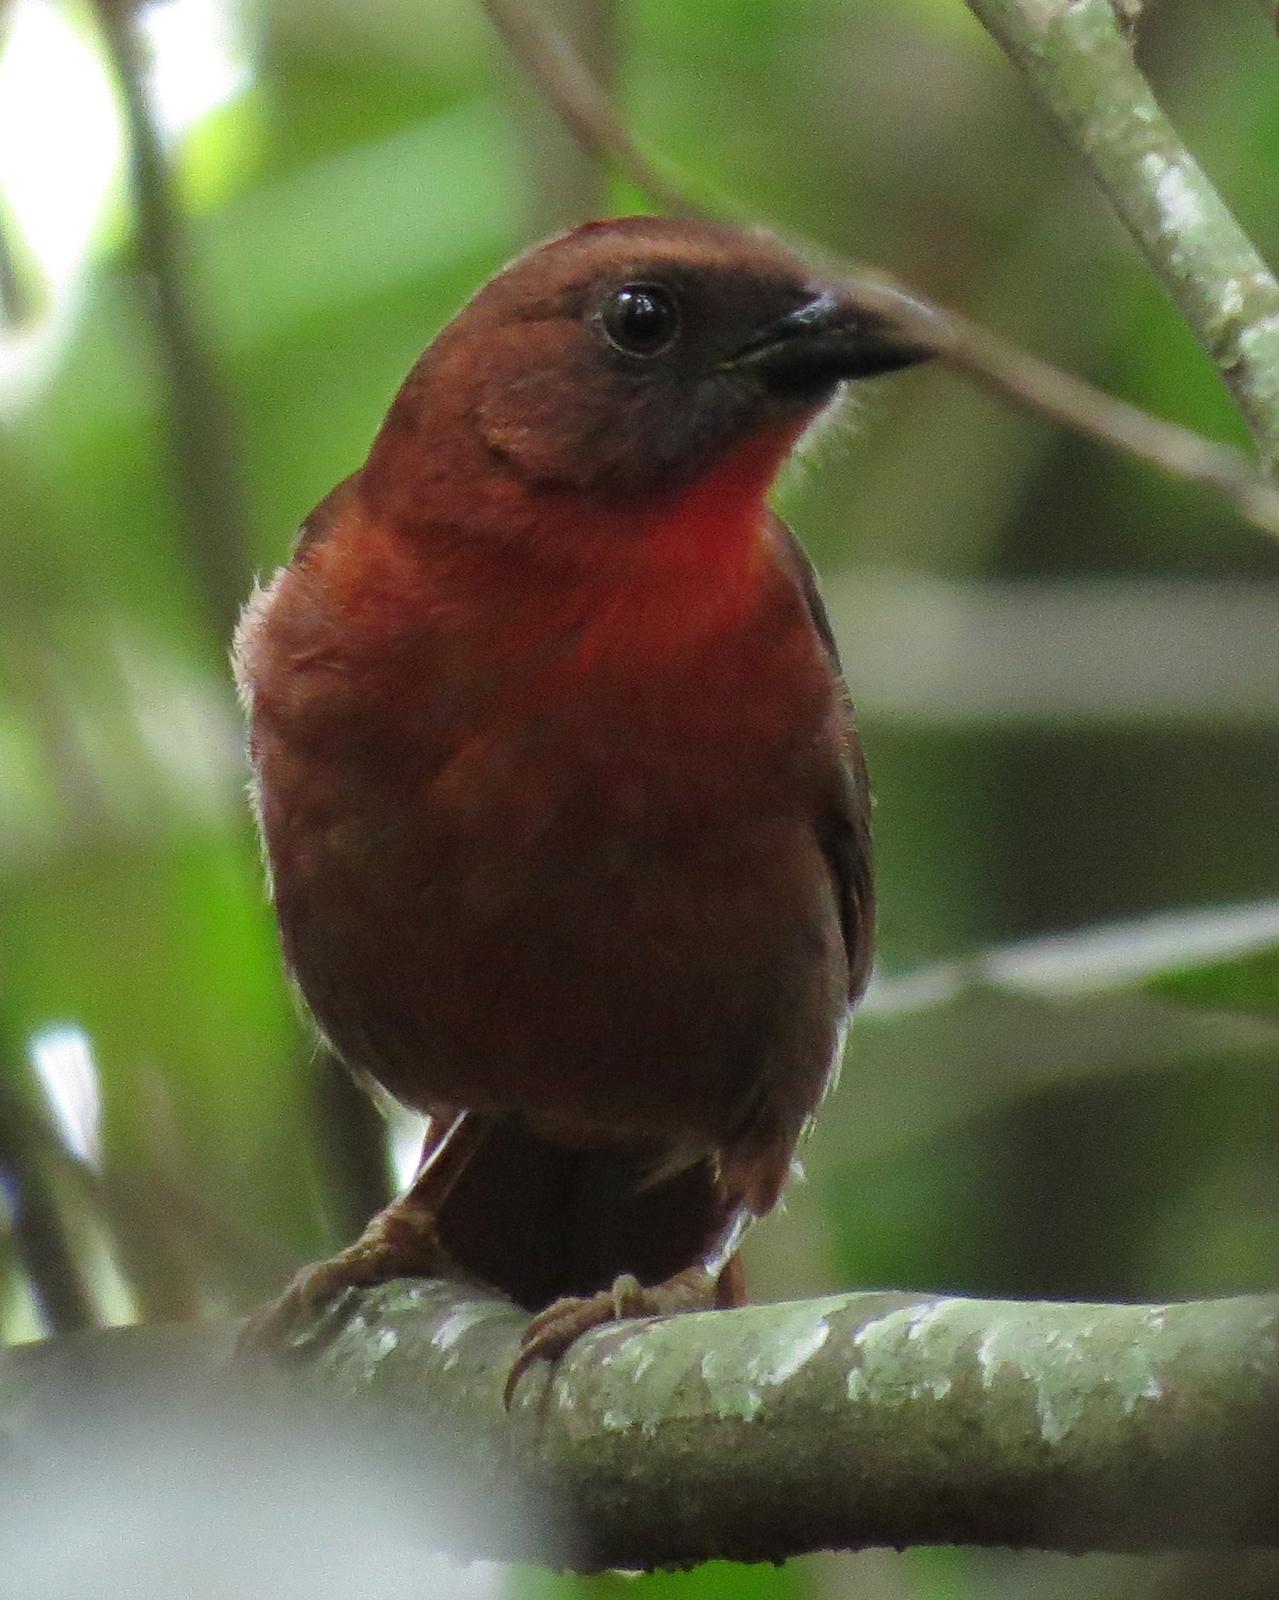 Red-throated Ant-Tanager Photo by John van Dort